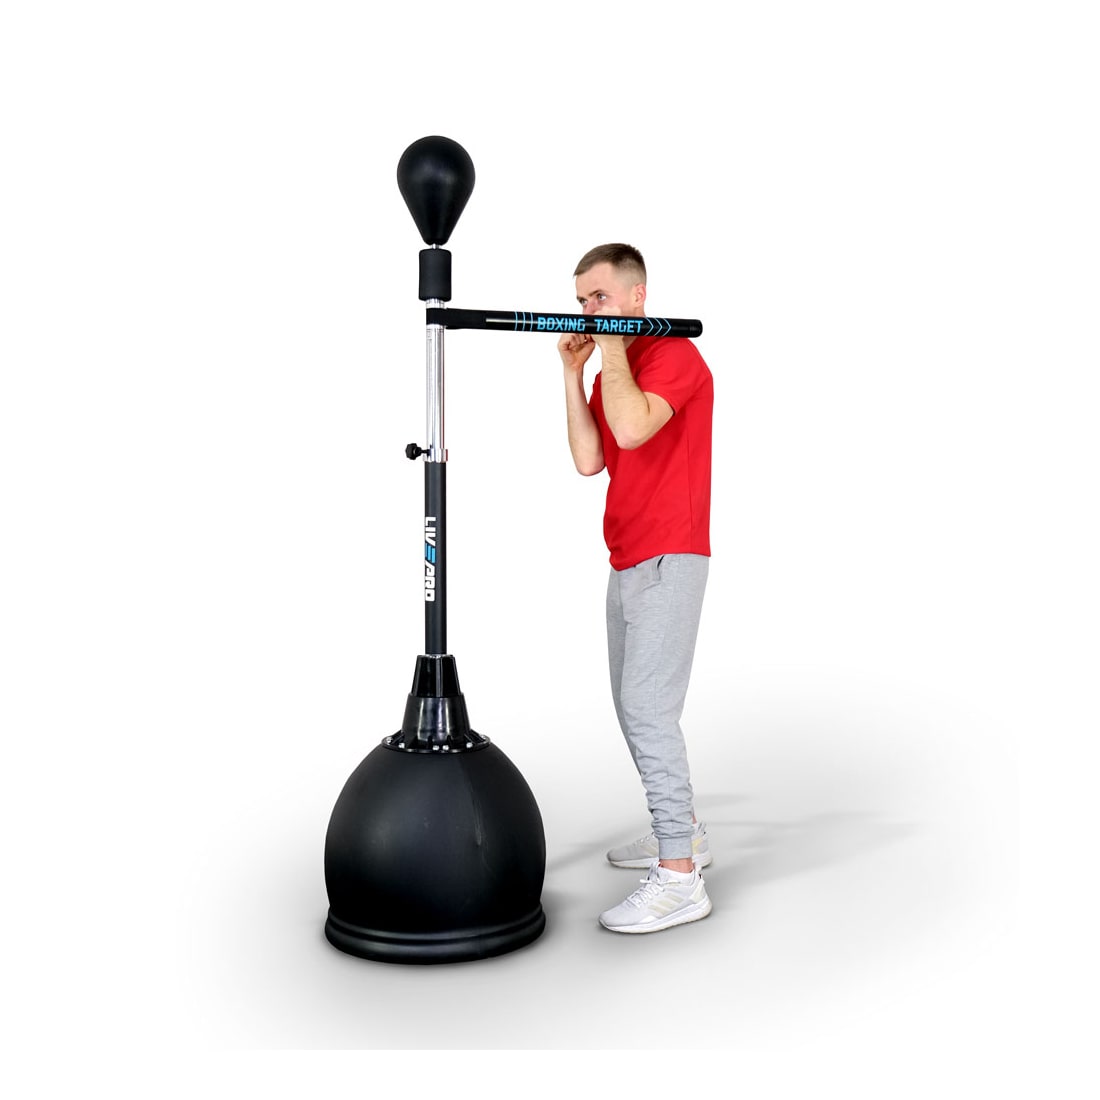 Livepro Free-Standing Boxing Stand - Rotating Target Display Set